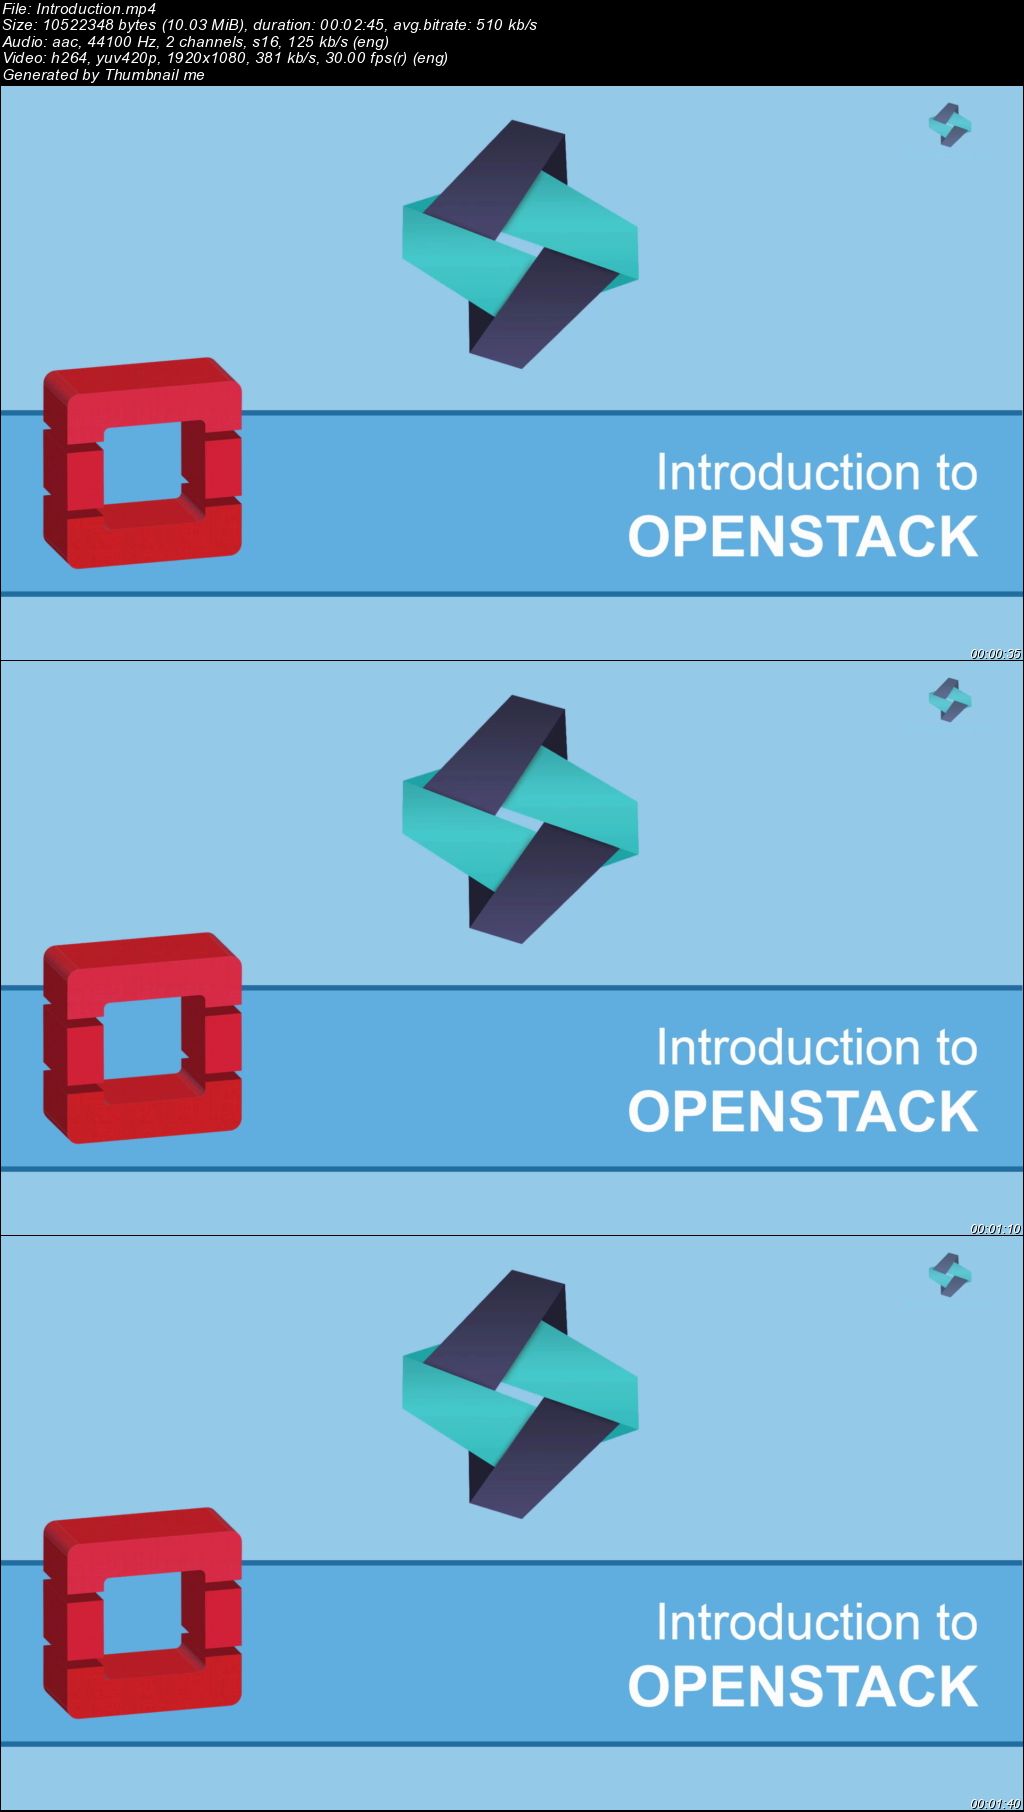 Beginners' guide to Cloud Computing and OpenStack